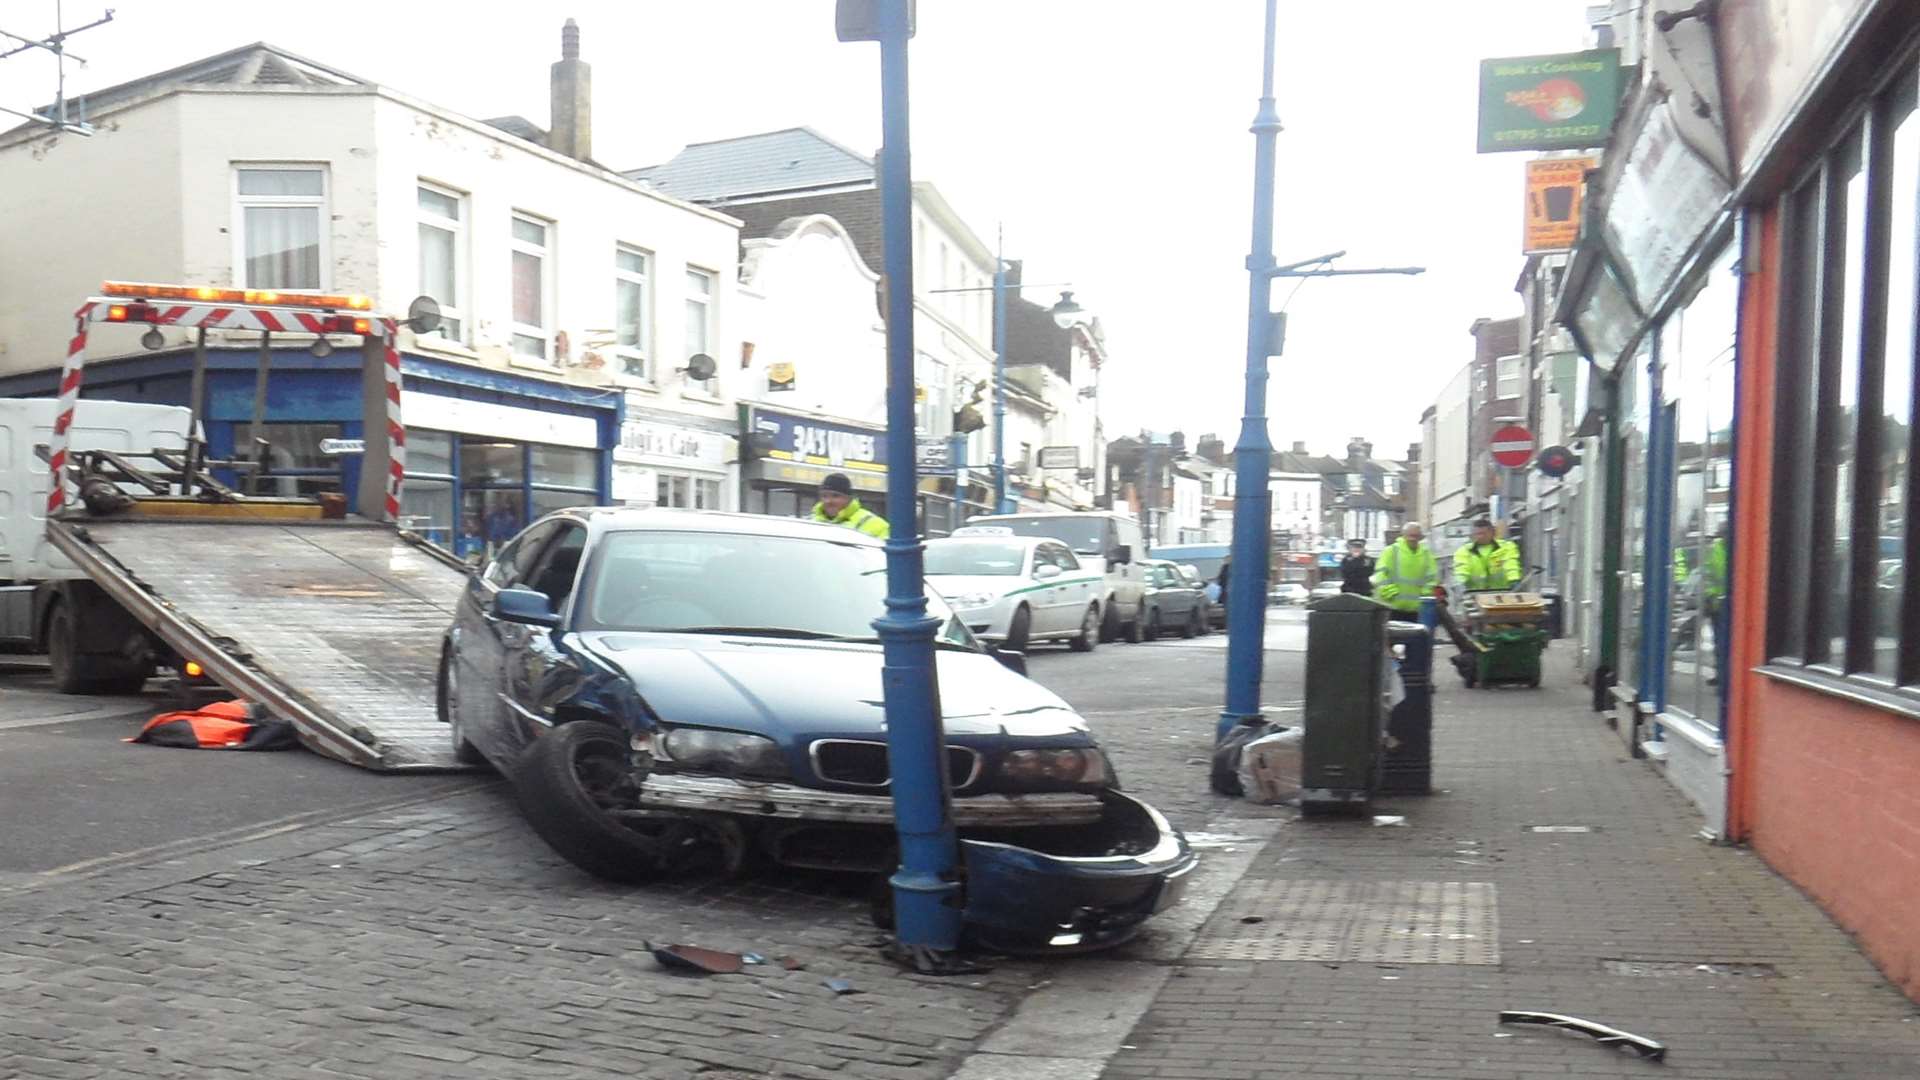 The crashed BMW in High Street, Sheerness